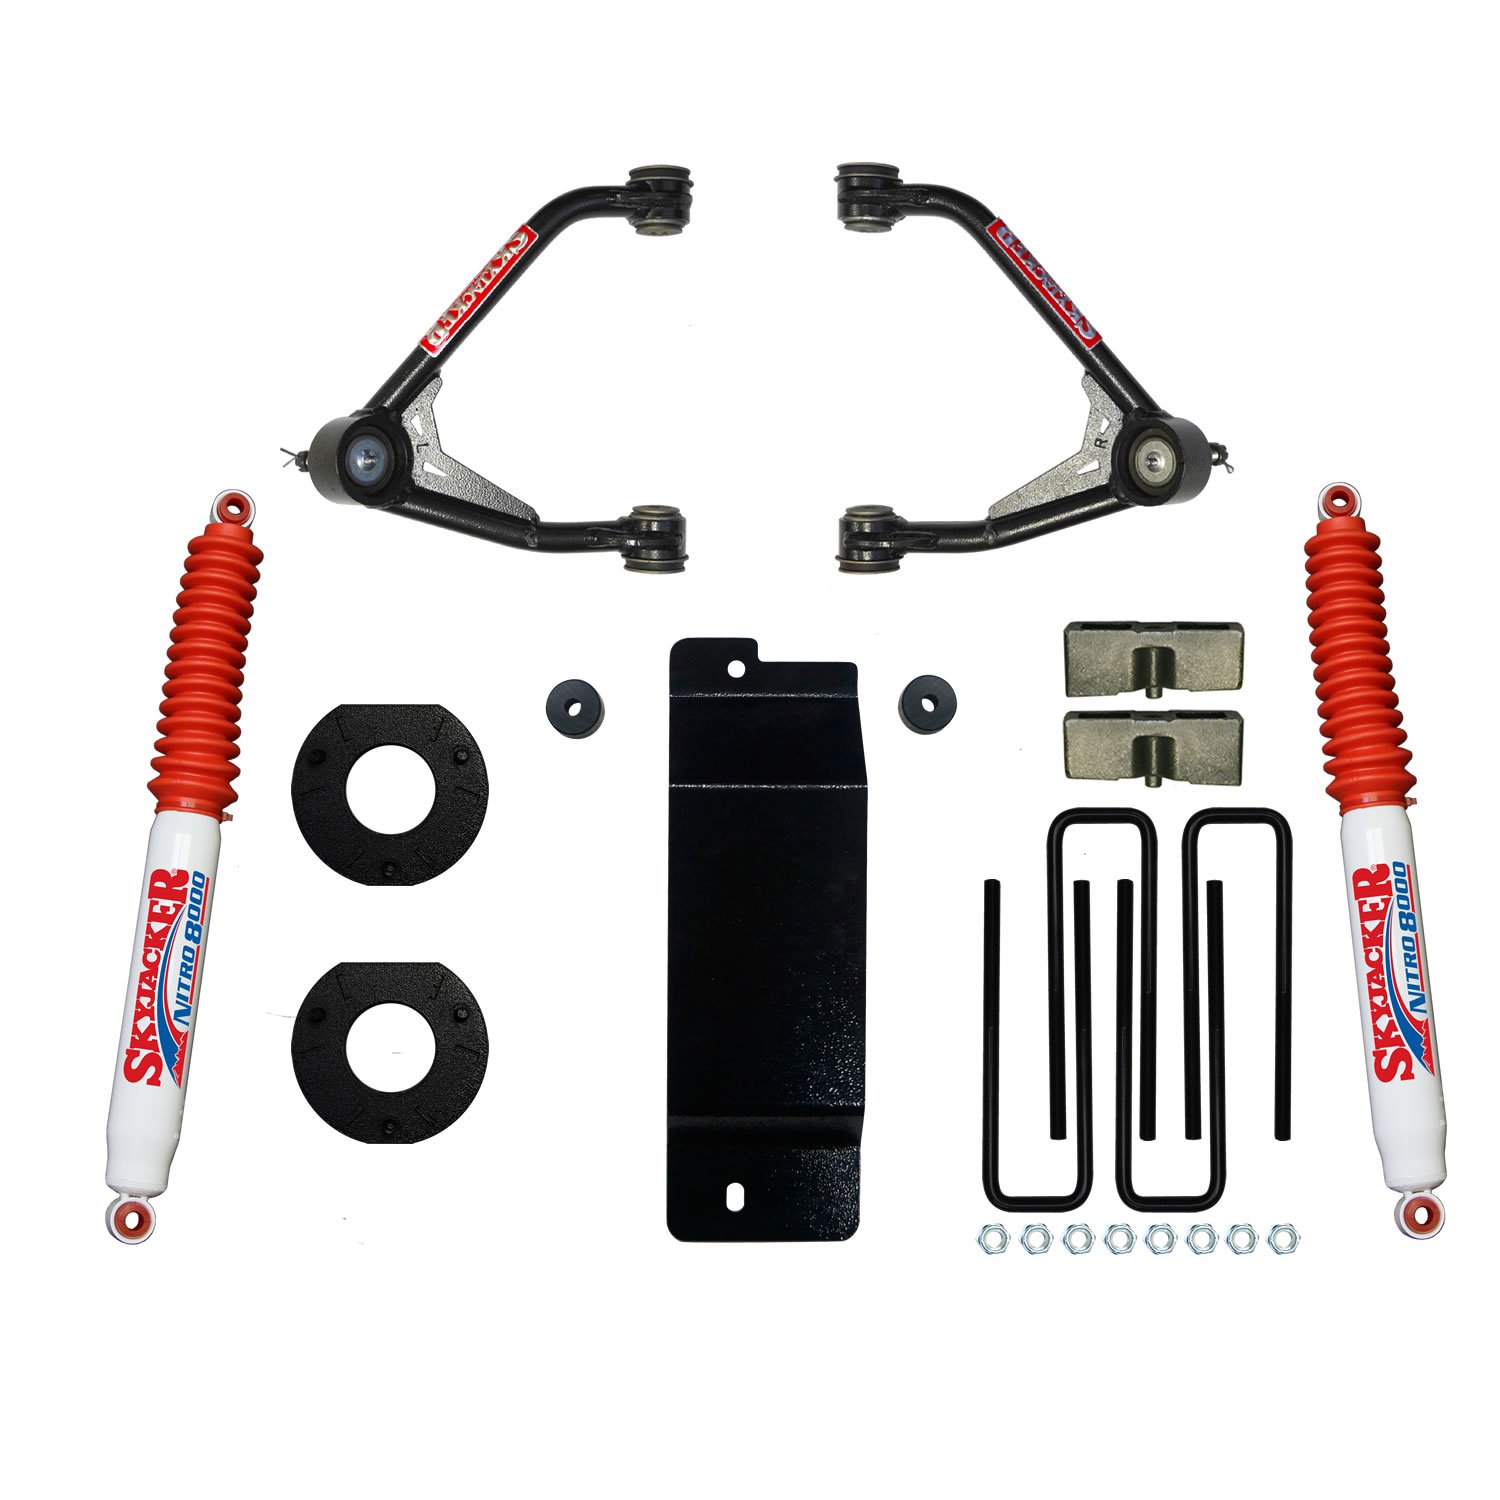 3.500-4.000 In. Upper Control Arm Lift Kit with Rear Shock Brackets for 2015-2016 GM SUV